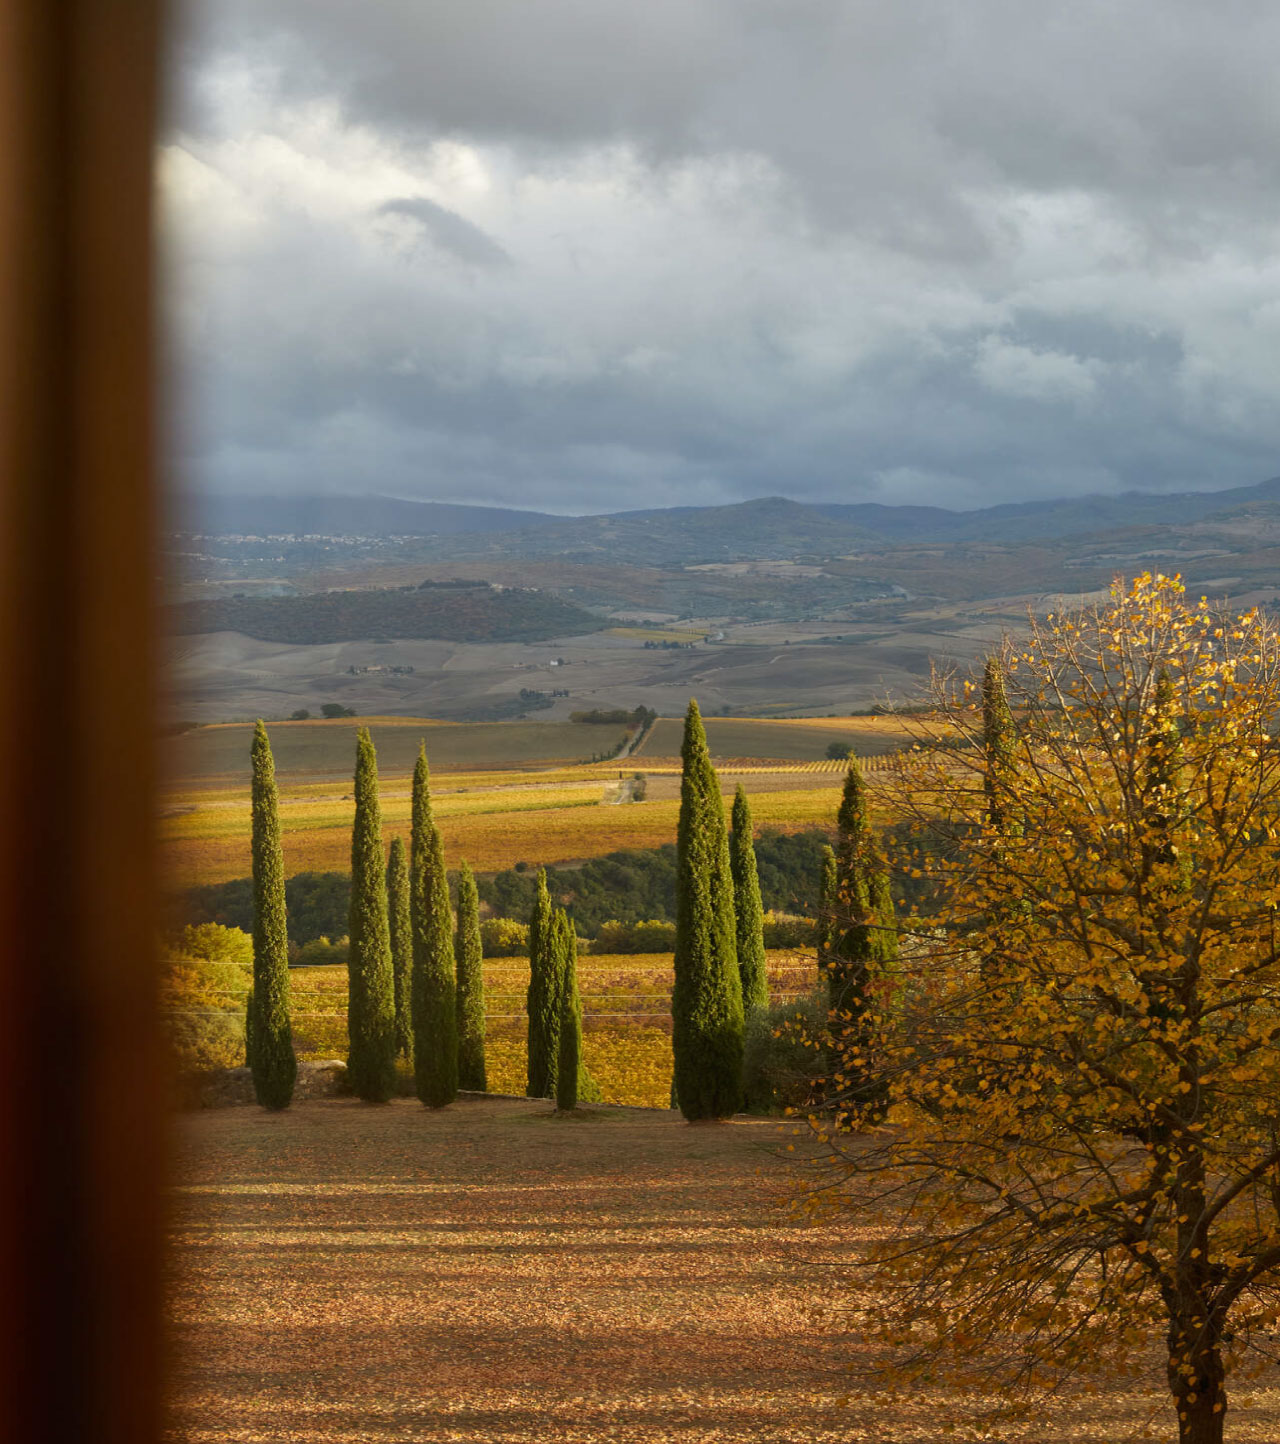 The view when looking out from Argiano Winery over Tuscany.